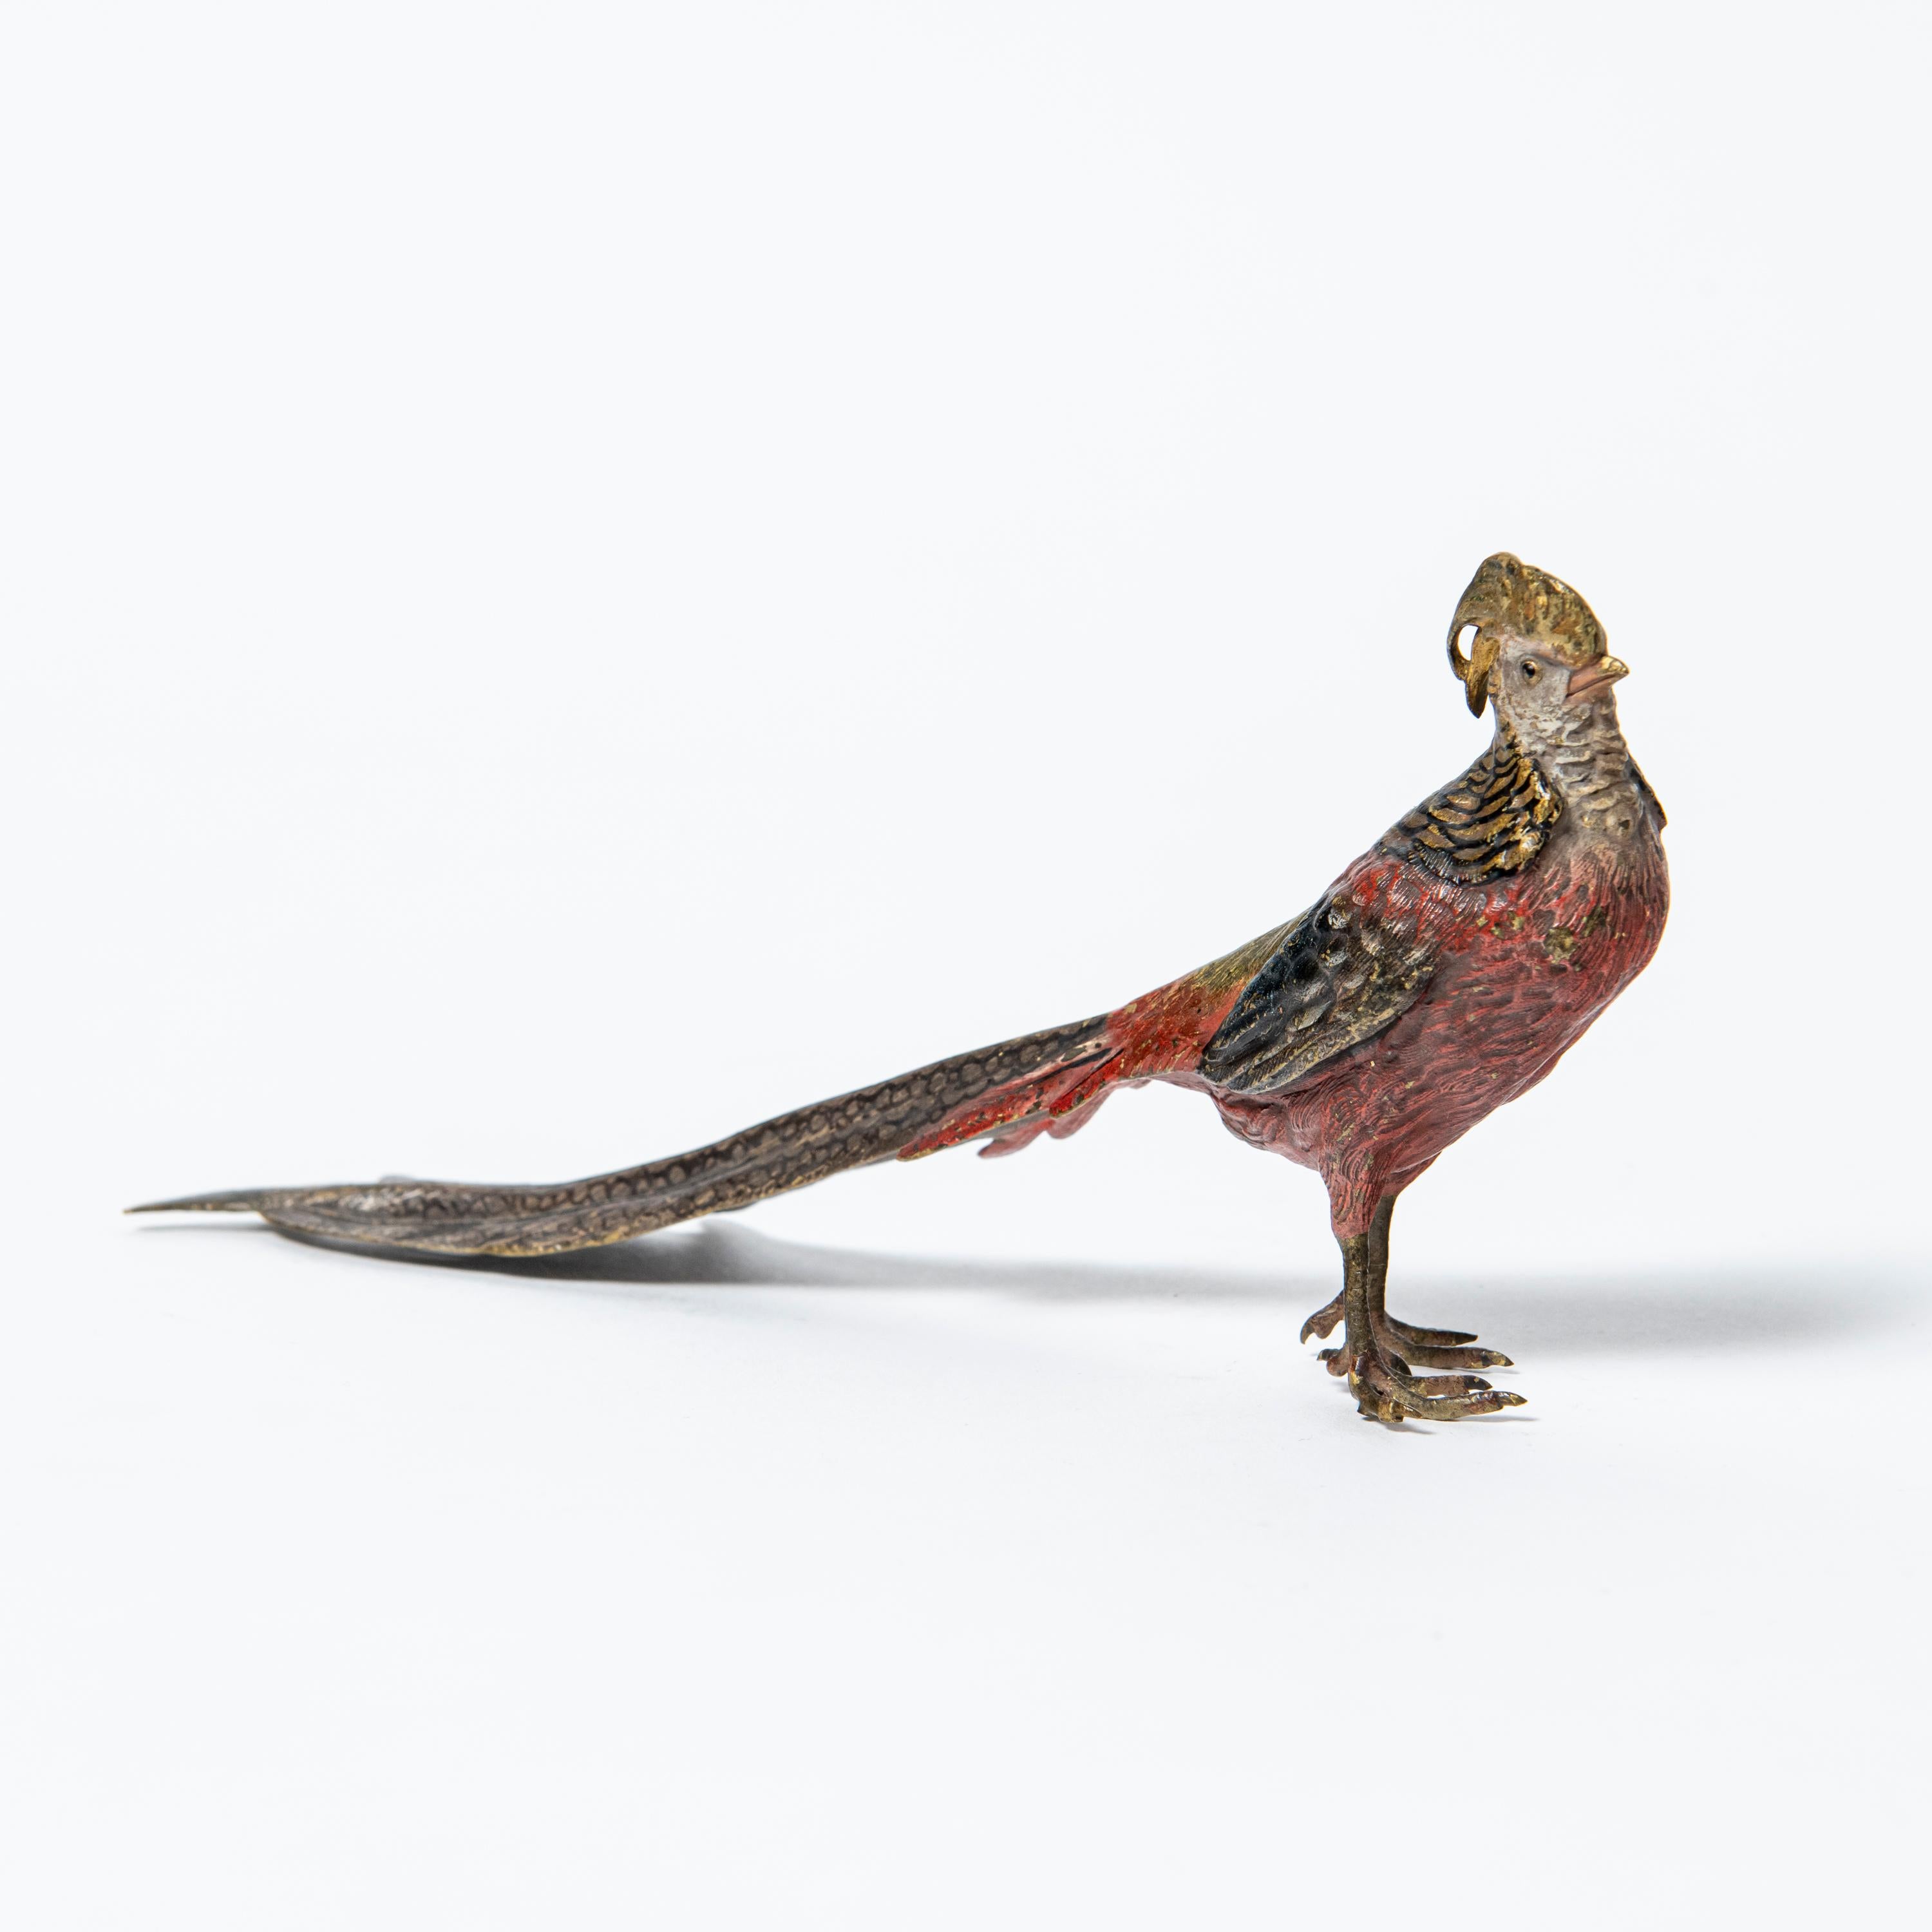 Cold-painted bronze pheasant sculpture attributed to Franz Bergmann. Austria, early 20th century.